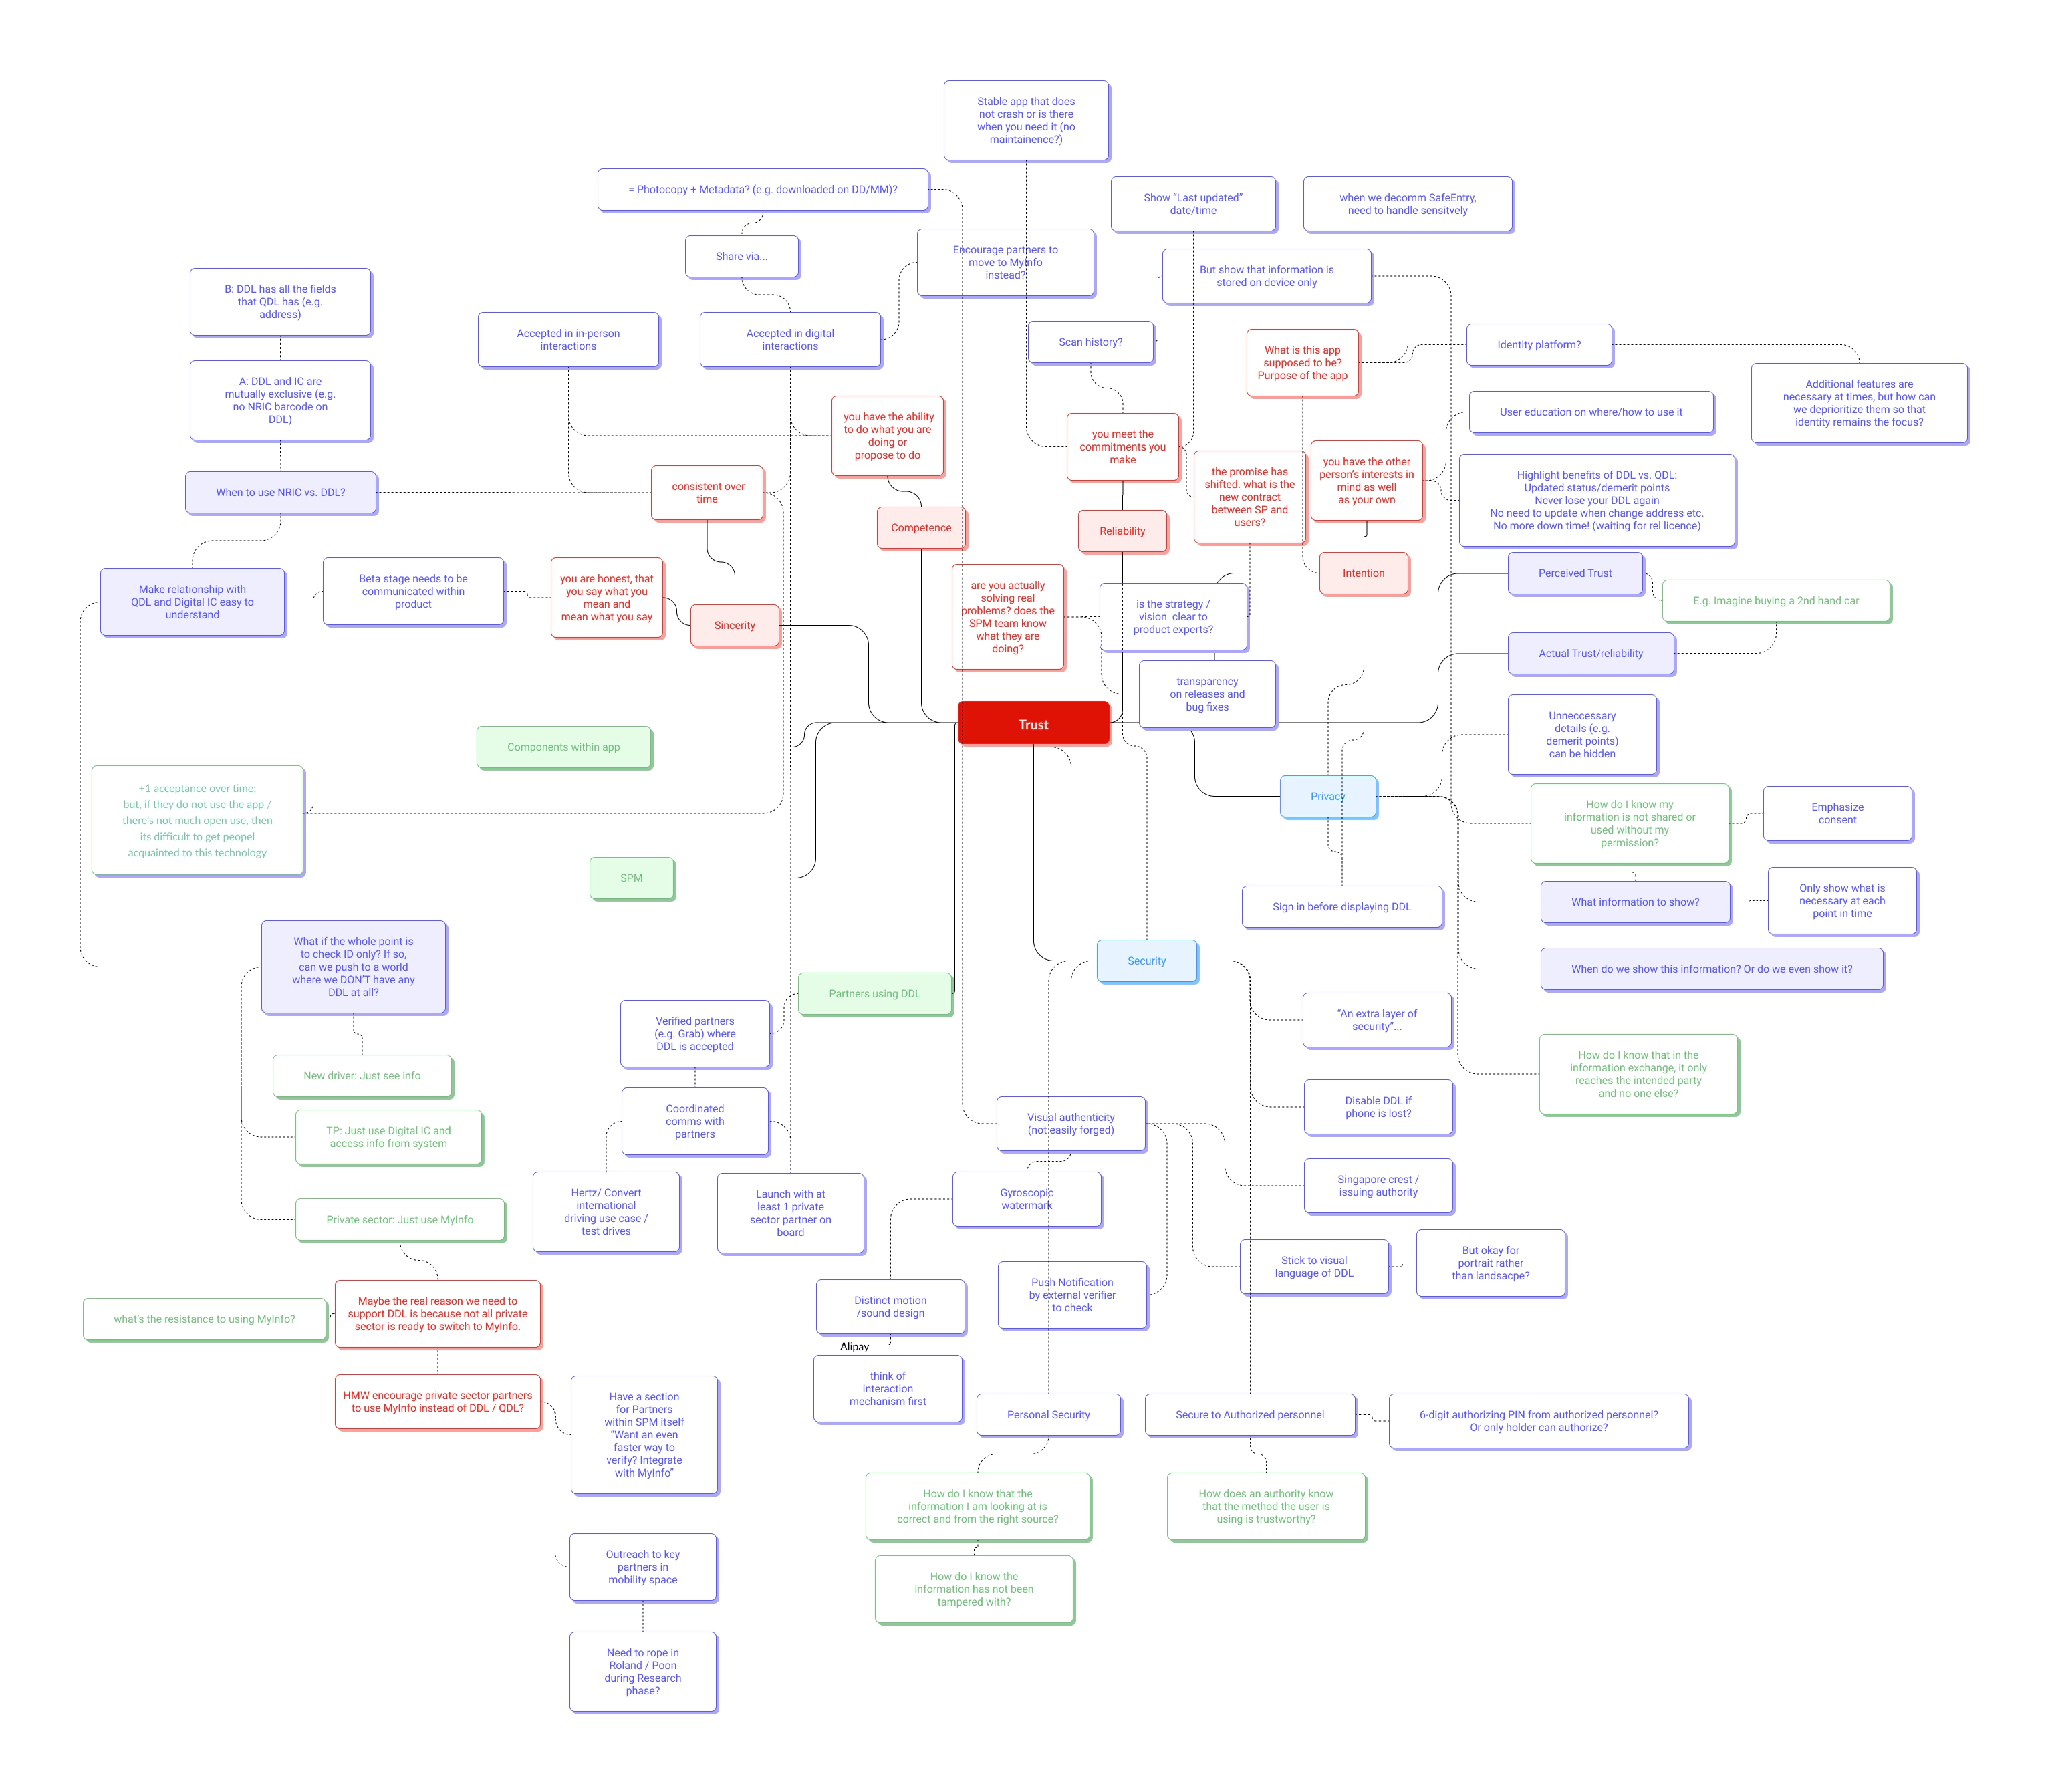 Image showing a mindmap of trust